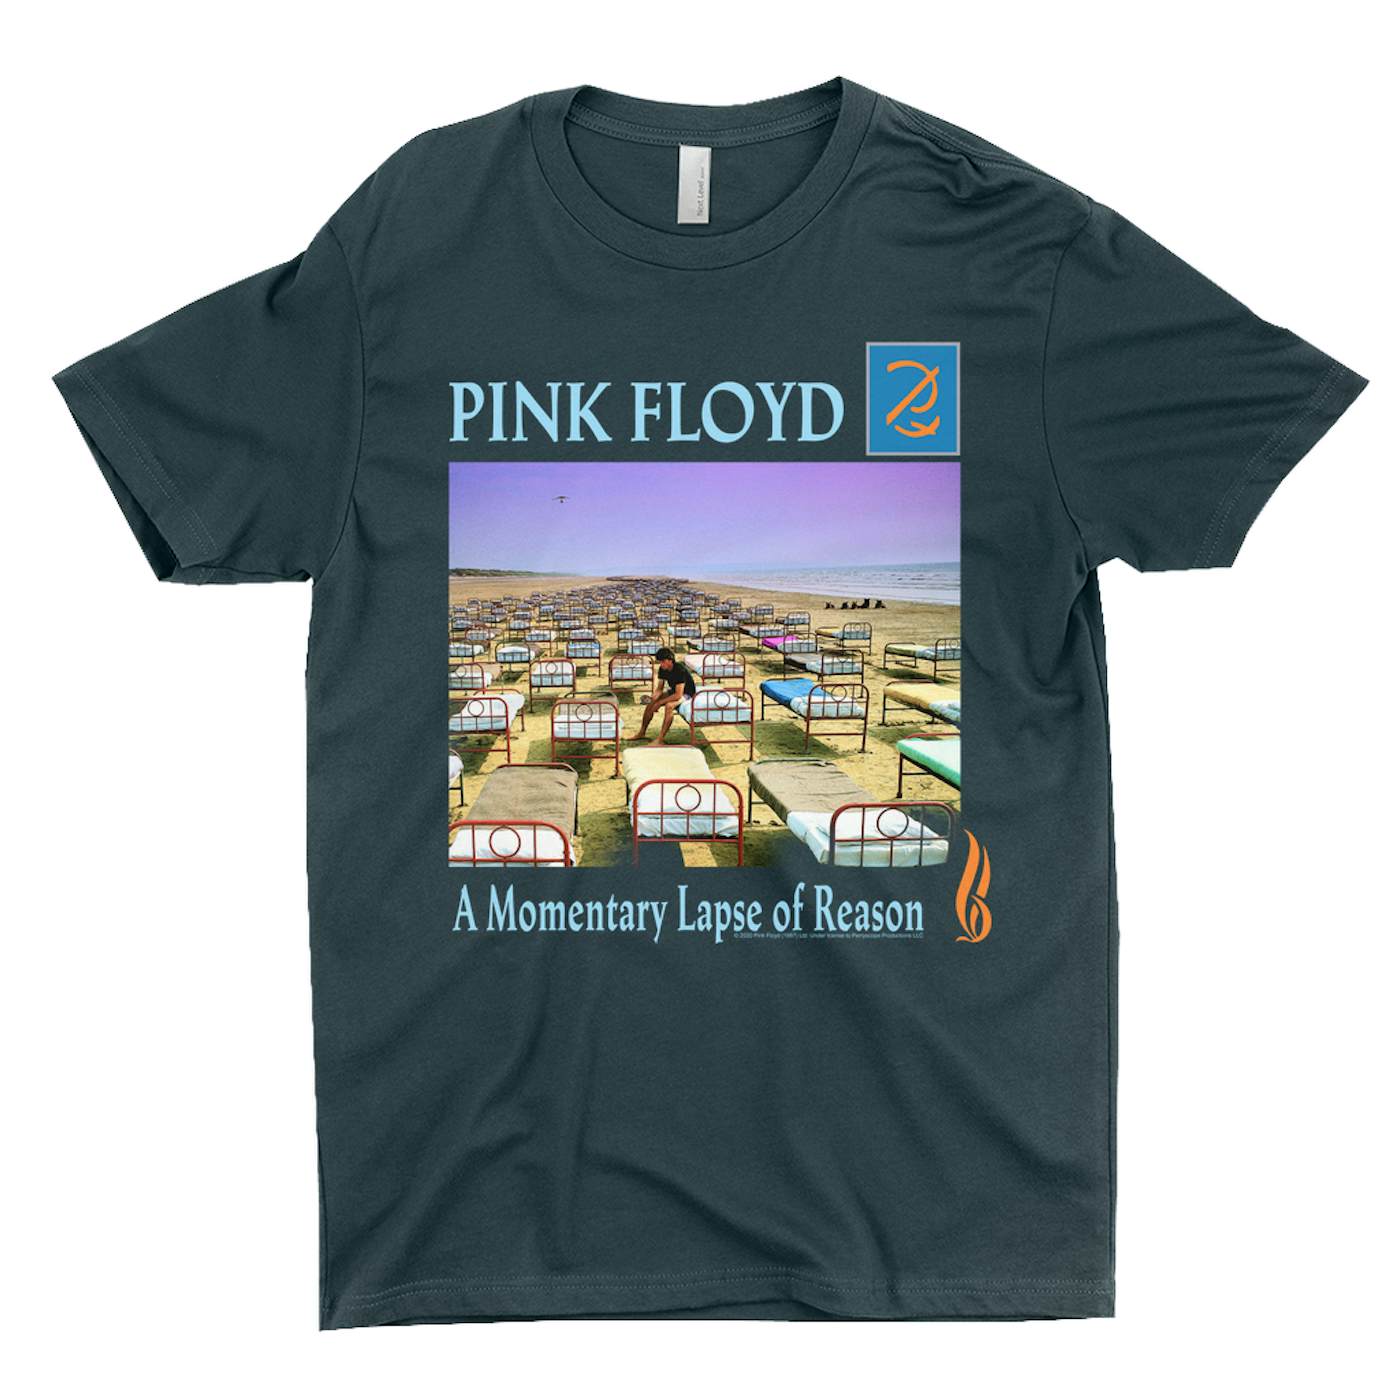 Pink Floyd T-Shirt | A Momentary Lapse Of Reason Album Cover Pink